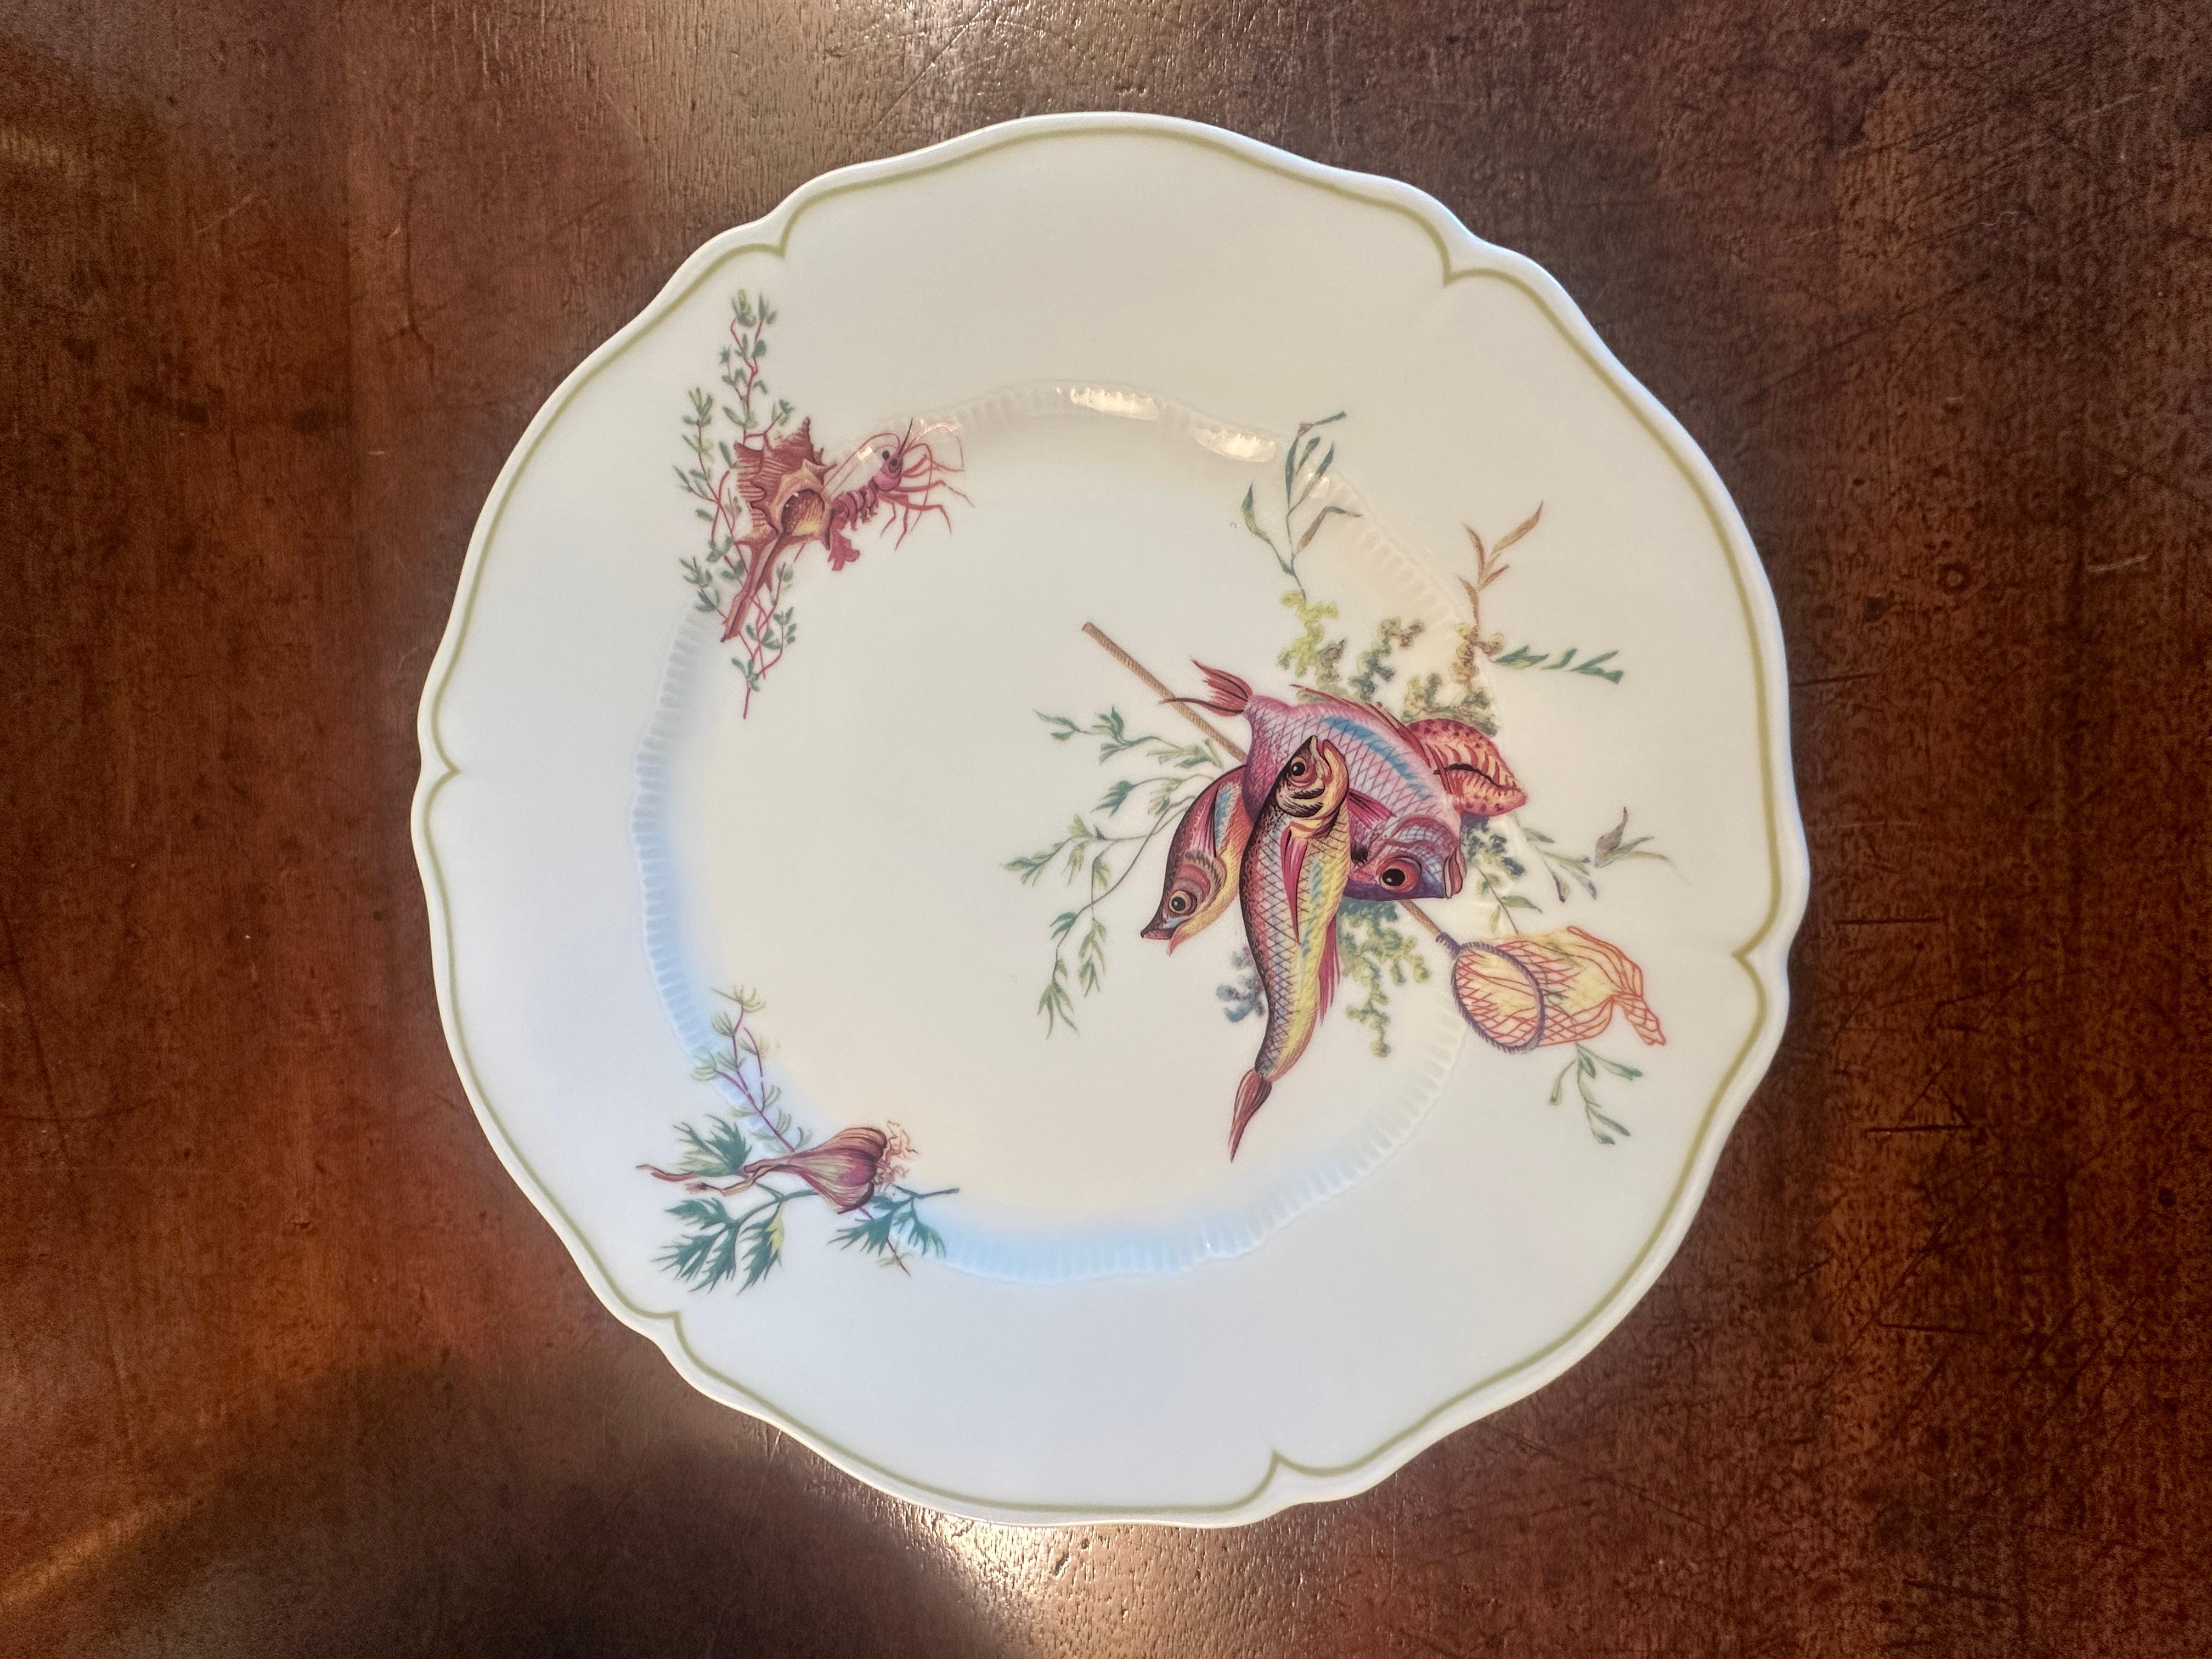 Hand-Painted Set of 12 Havilland- Limoges Dinner Plates, Six Fish and Crustacean Designs For Sale